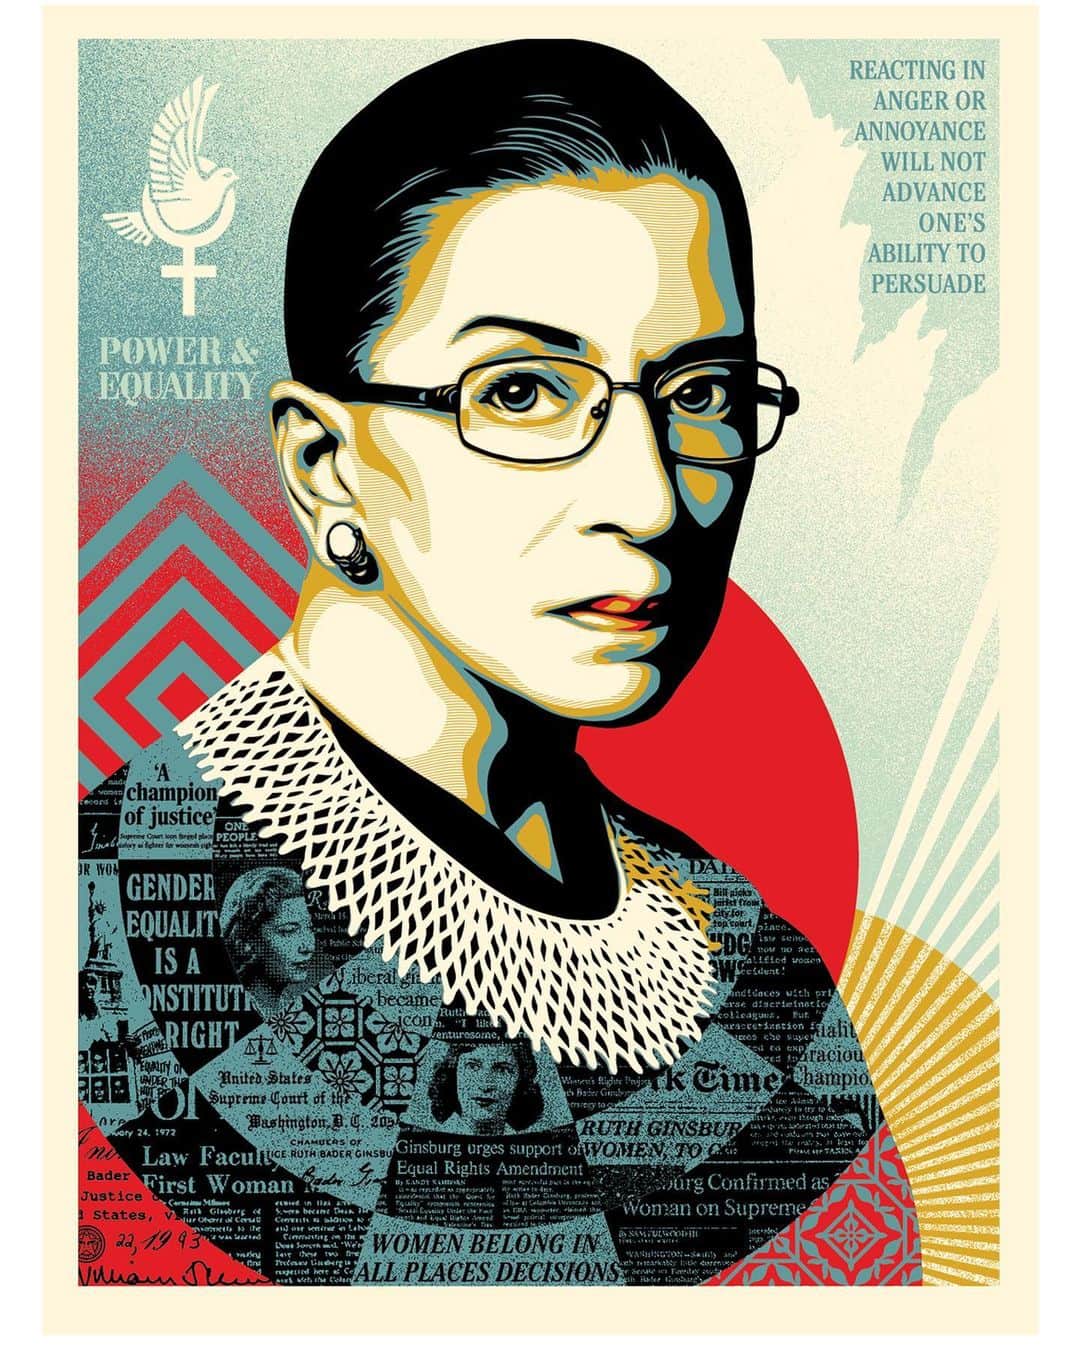 Shepard Faireyさんのインスタグラム写真 - (Shepard FaireyInstagram)「Ruth Bader Ginsburg is a hero of mine because she was a low-key radical. She encountered gender discrimination in her personal life which she overcame with perseverance and professional excellence, allowing her to infiltrate the male-dominated system and change that system from within to benefit women's rights and equality under the law. Ginsburg's accomplishments are inspiring, including founding the Women's Rights Project at the American Civil Liberties Union before being appointed to the Supreme Court in 1993. Ginsburg was a champion of justice philosophically, but she worked tirelessly to manifest her ideas about justice in real-world policies. RBG was legendary for her work ethic, getting by on only a few hours of sleep and prolifically writing important opinions, often dissenting powerfully. Justice Ginsburg always stood up for equality with a degree of dignity and civility that was unassailable. I admire her ability to work with people she disagreed with and attempt to win them over rather than react with anger. Ruth Bader Ginsburg, thank you for being a role model in both style and substance. I'm donating proceeds from the sale of these prints to the League of Women Voters because of their continuous work to inform the public to be active participants in democracy. -Shepard  A CHAMPION OF JUSTICE (Ruth Bader Ginsburg). Screen print on thick cream Speckletone paper. Original Photo by @ruvenafanador. Signed by Shepard Fairey. Numbered edition of 500. Proceeds go to @leagueofwomenvoters. Available on Tuesday, March 2nd @ 10 AM (18 x 24) and 1 PM (24 x 36) PT at https://store.obeygiant.com/collections/prints. Max order: 1 per customer/household. International customers are responsible for import fees due upon delivery.⁣ Shipping may be delayed due to COVID19. ALL SALES FINAL.   18 x 24 inches $80 @ 10am PT 24 x 36 inches $120 @ 1pm PT」2月27日 12時23分 - obeygiant